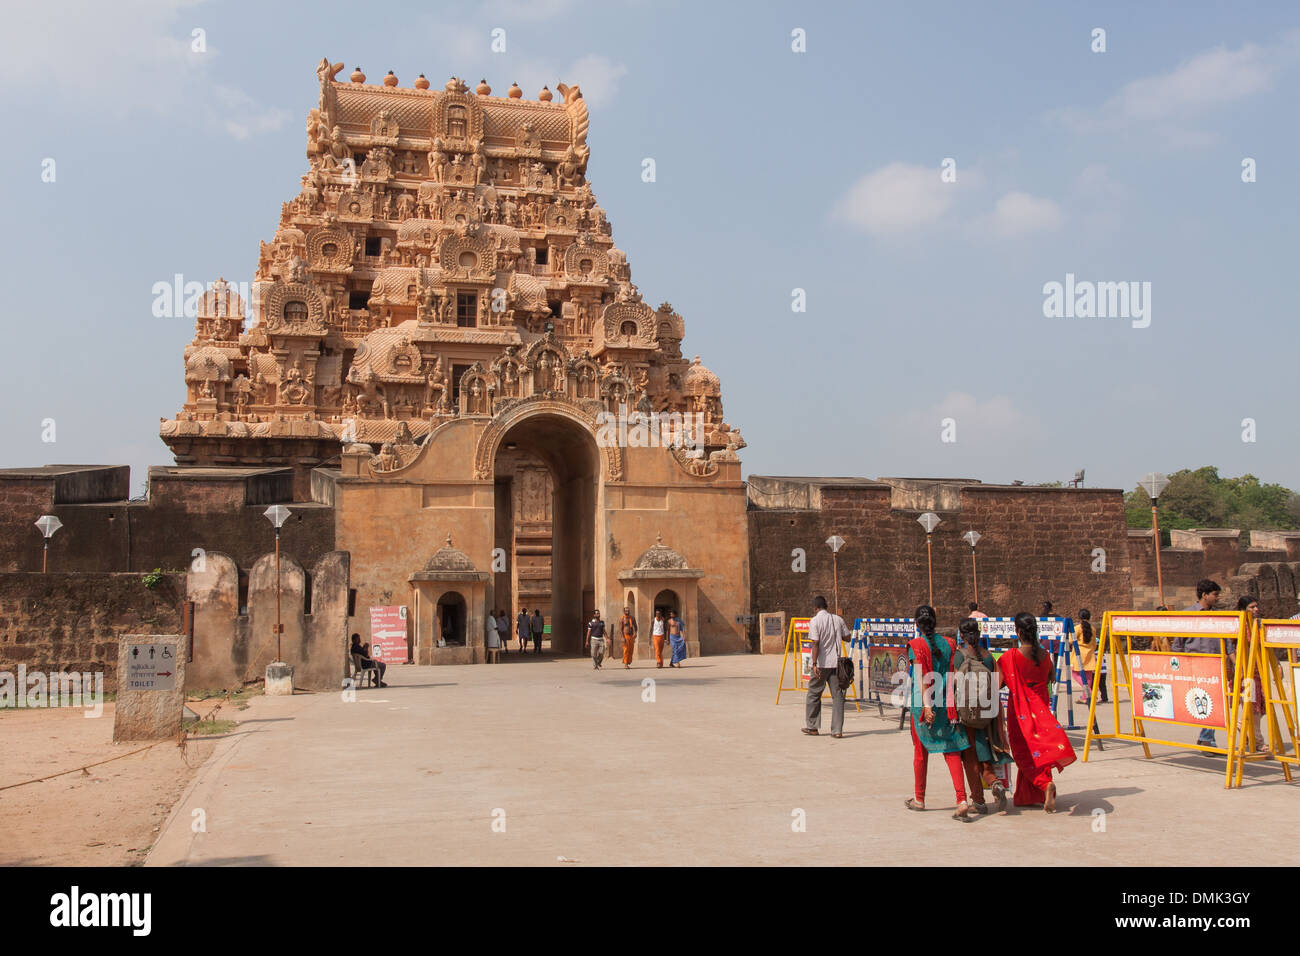 GOPURAM OR THE GATE MARKING THE ENTRANCE TO THE TEMPLE OF BRIHADESVARA ALSO CALLED TEMPLE OF RAJARAJESHVARAM, LISTED AS A WORLD HERITAGE SITE BY UNESCO WITHIN THE CLASSIFICATION OF THE GREAT LIVING CHOLA TEMPLES, TANJAVUR, THANJAVUR, TANJORE, STATE OF TAM Stock Photo